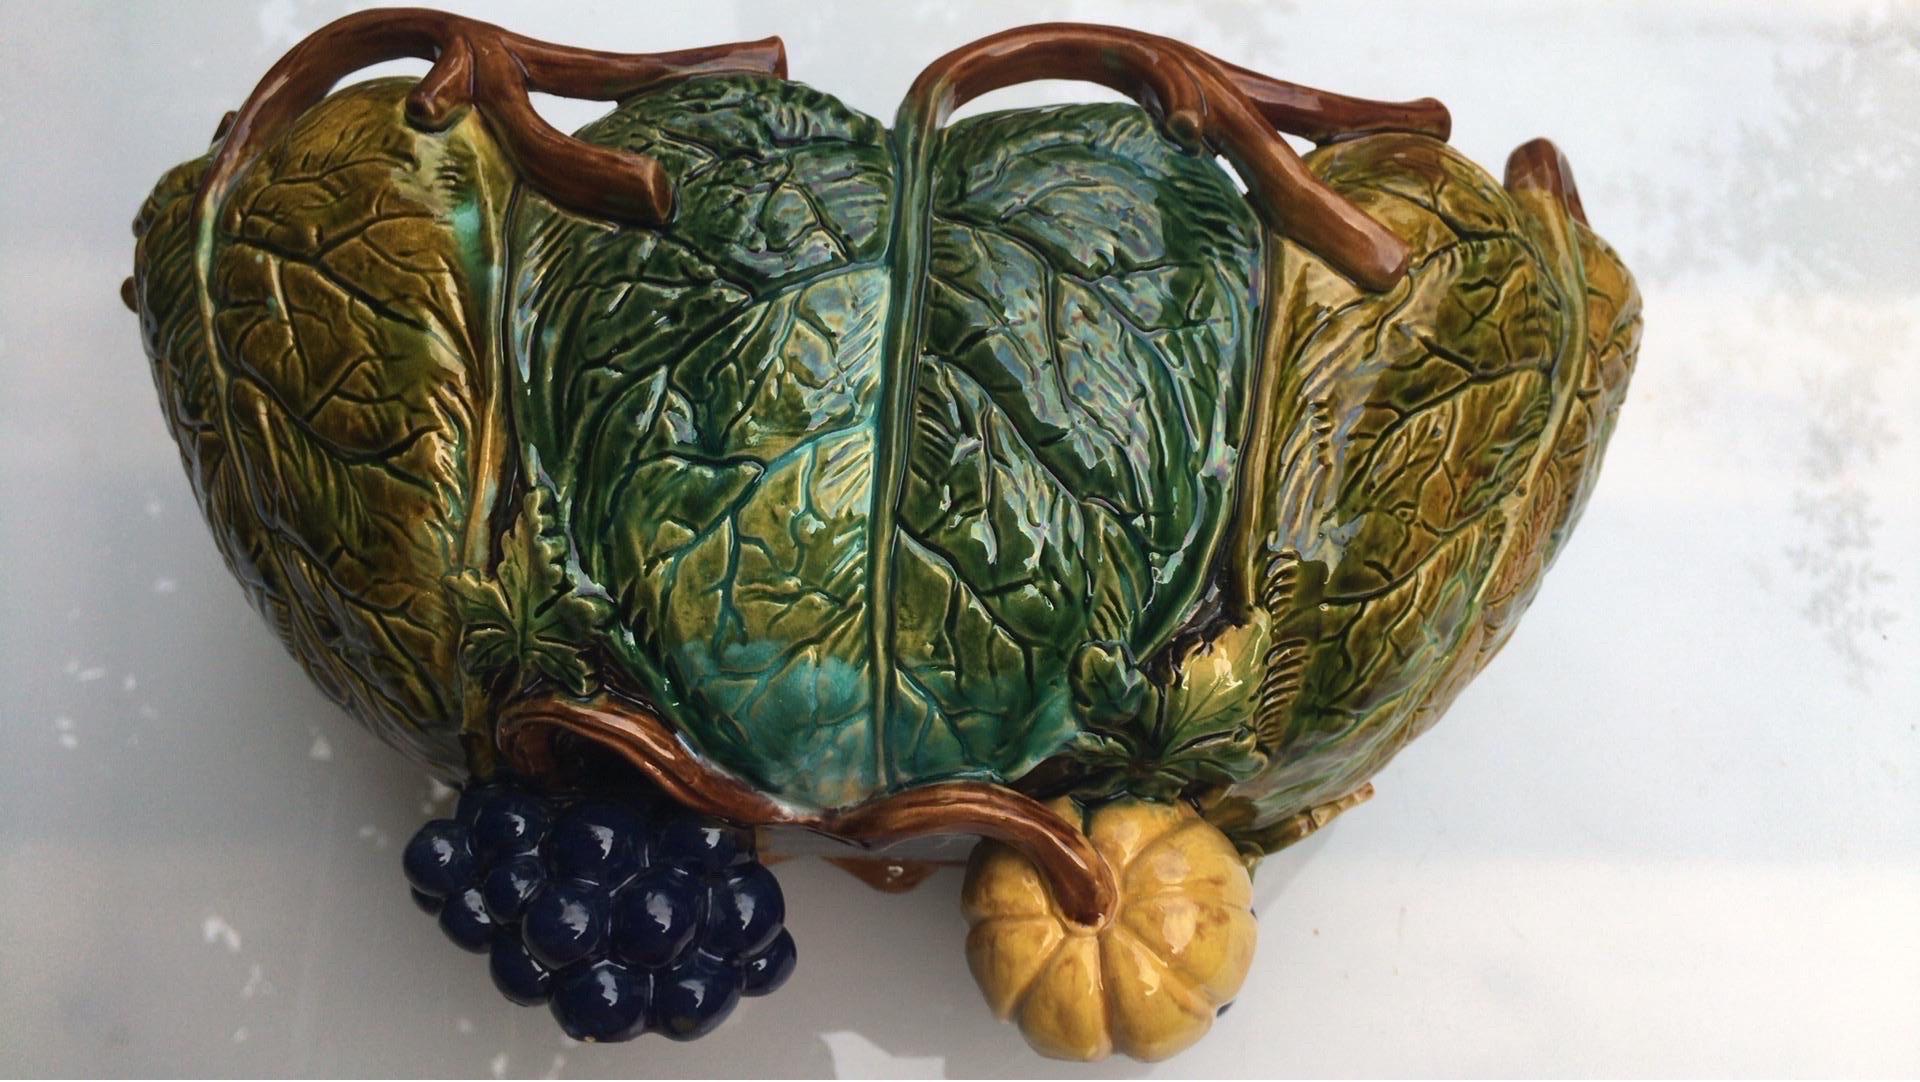 Rare and unique 19th century Majolica jardinière with squash, grape and leaves signed Ws & S (Wilhelm Schiller & Son).